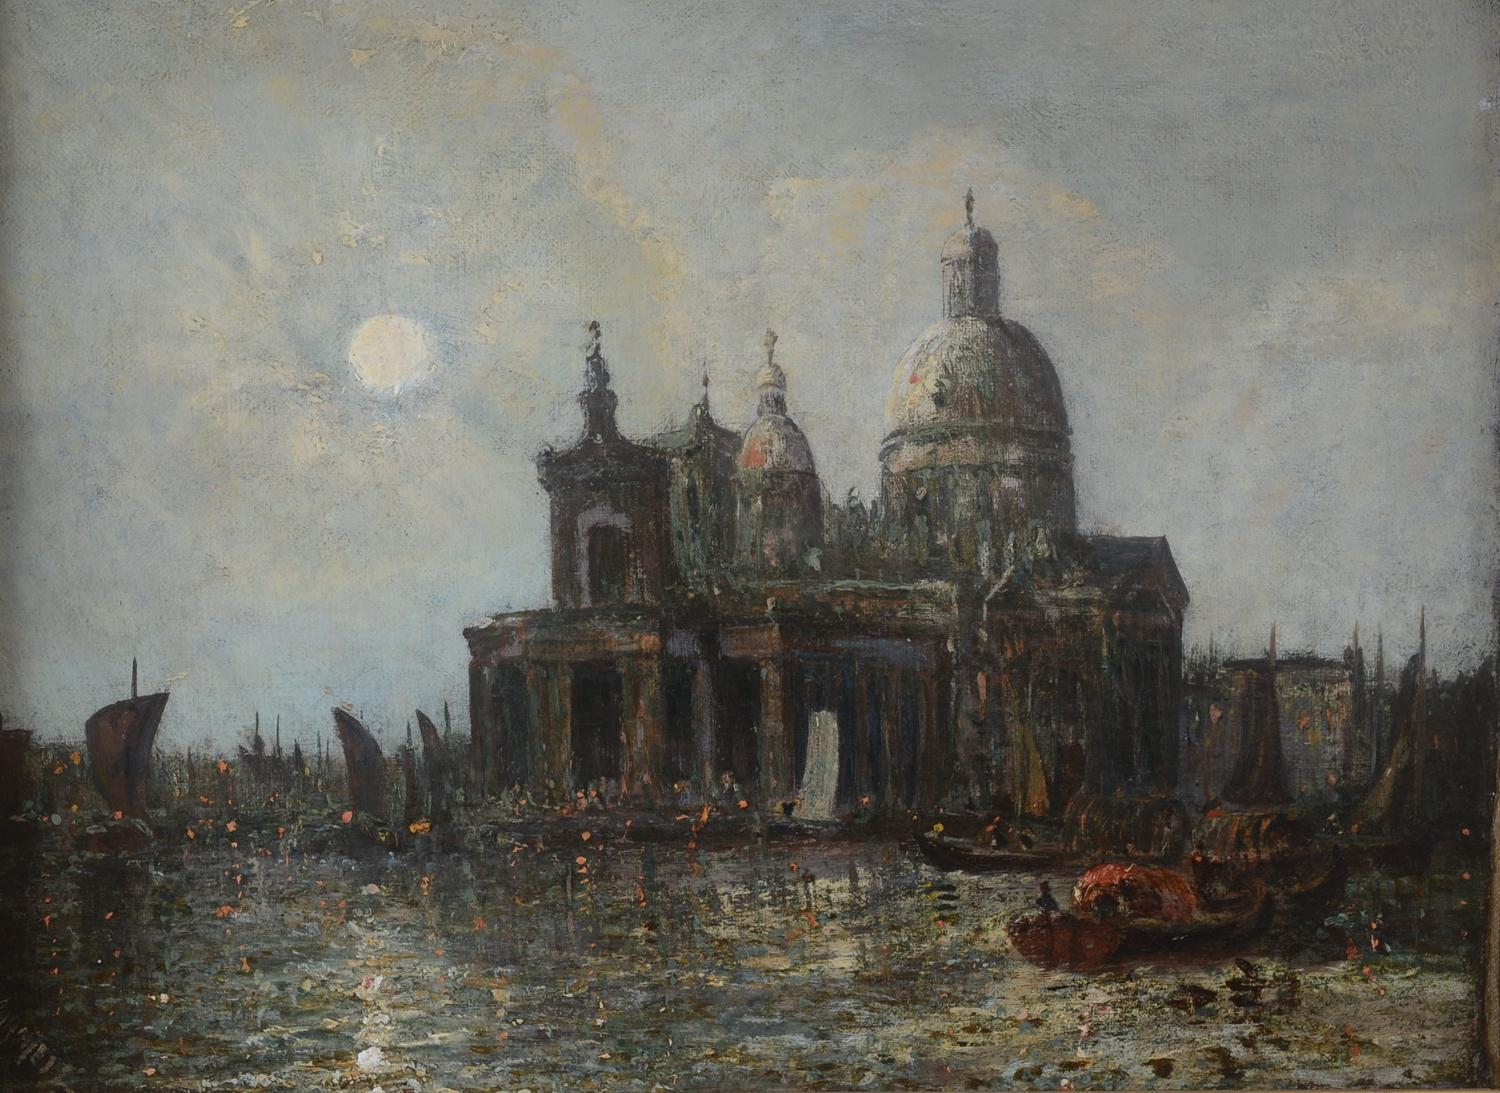 Georges Maroniez Landscape Painting - "Grand Canal, Venice by Moonlight"